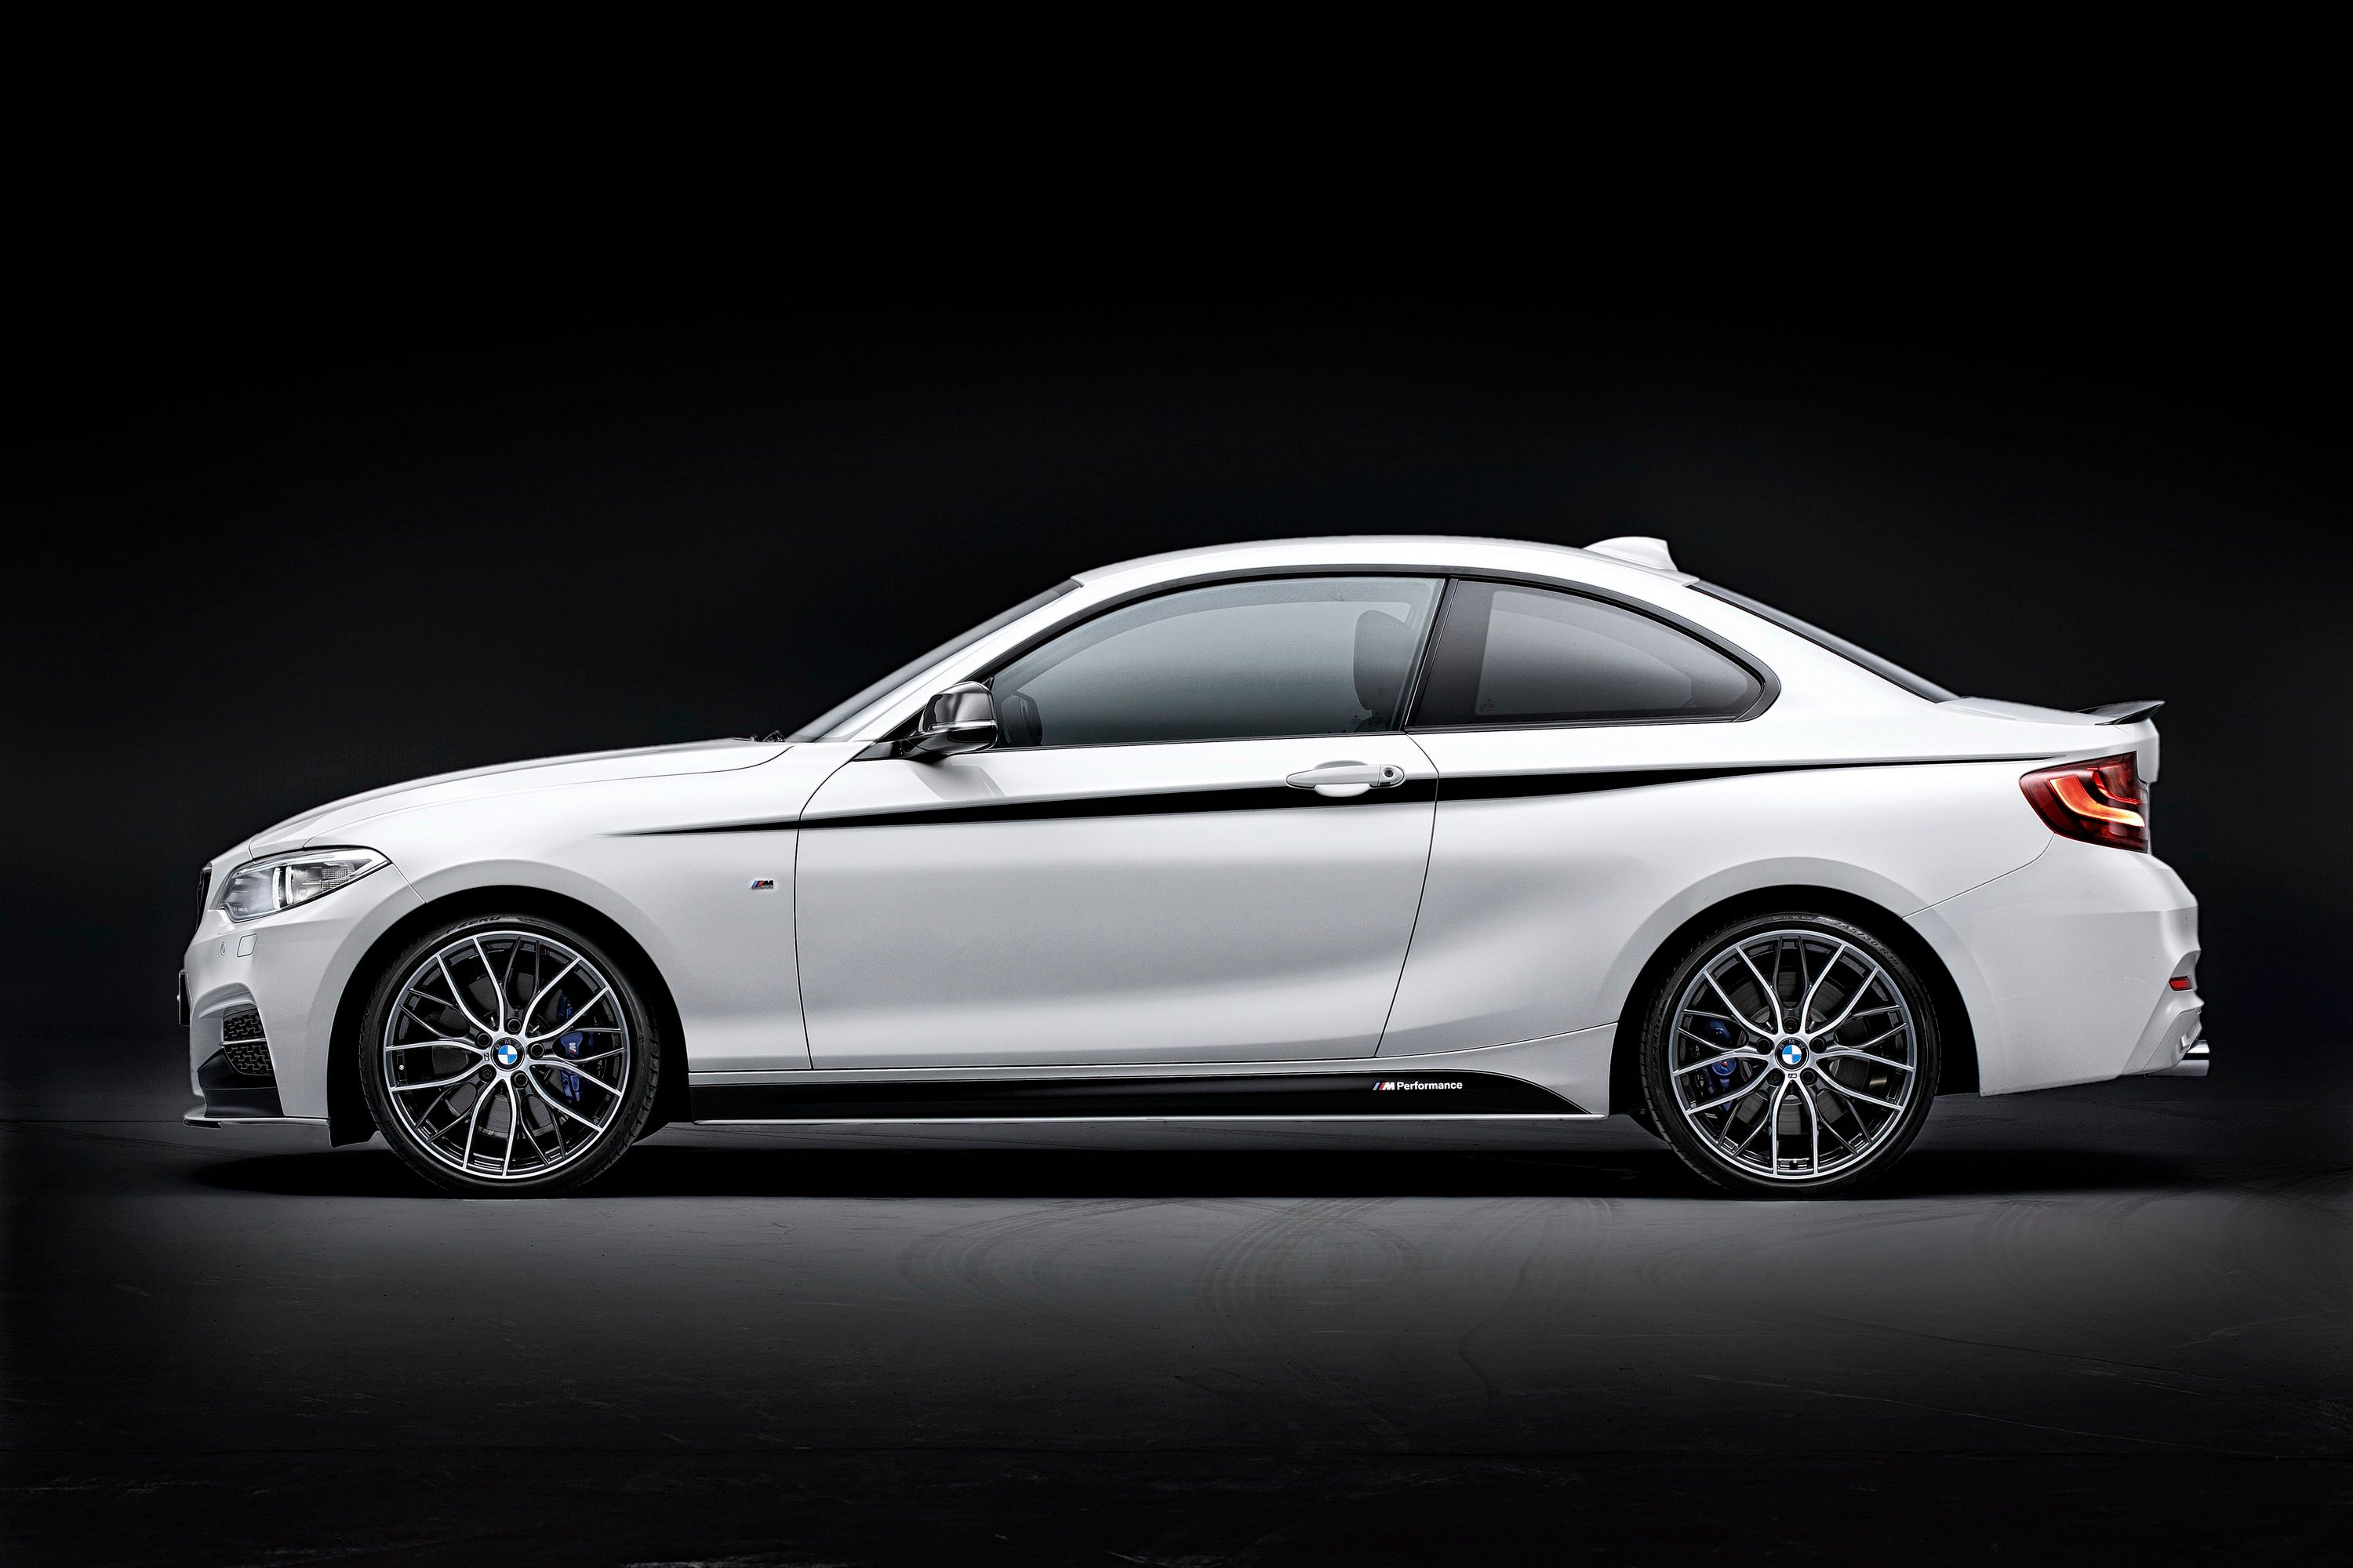 2014 BMW 2 Series Coupe with M Performance parts